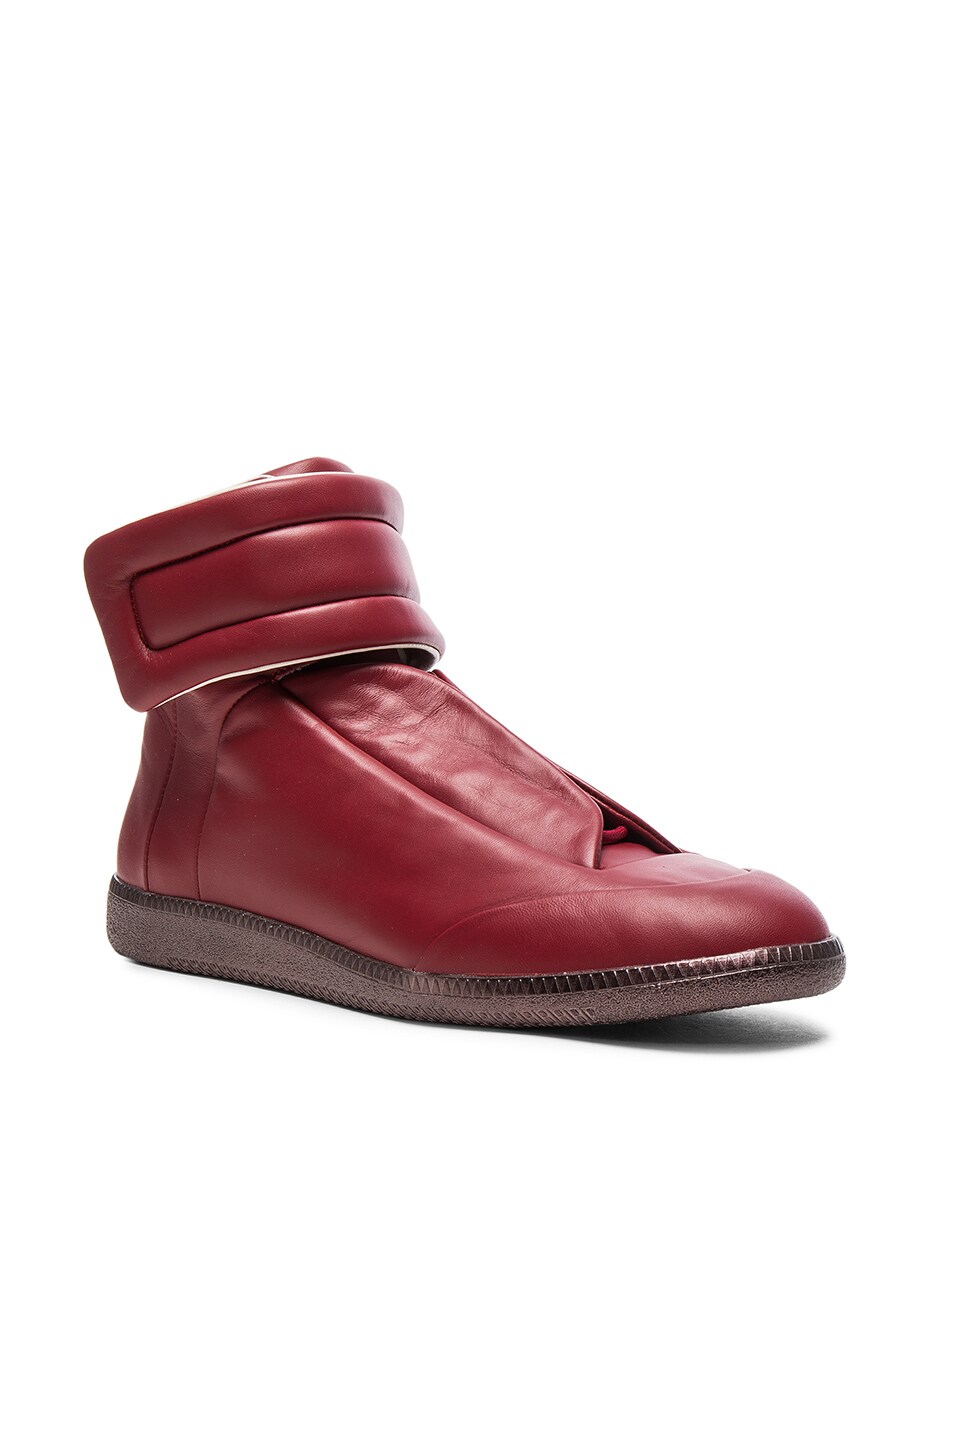 Image 1 of Maison Margiela Future High Top Sneakers in Bordeaux & Grenade